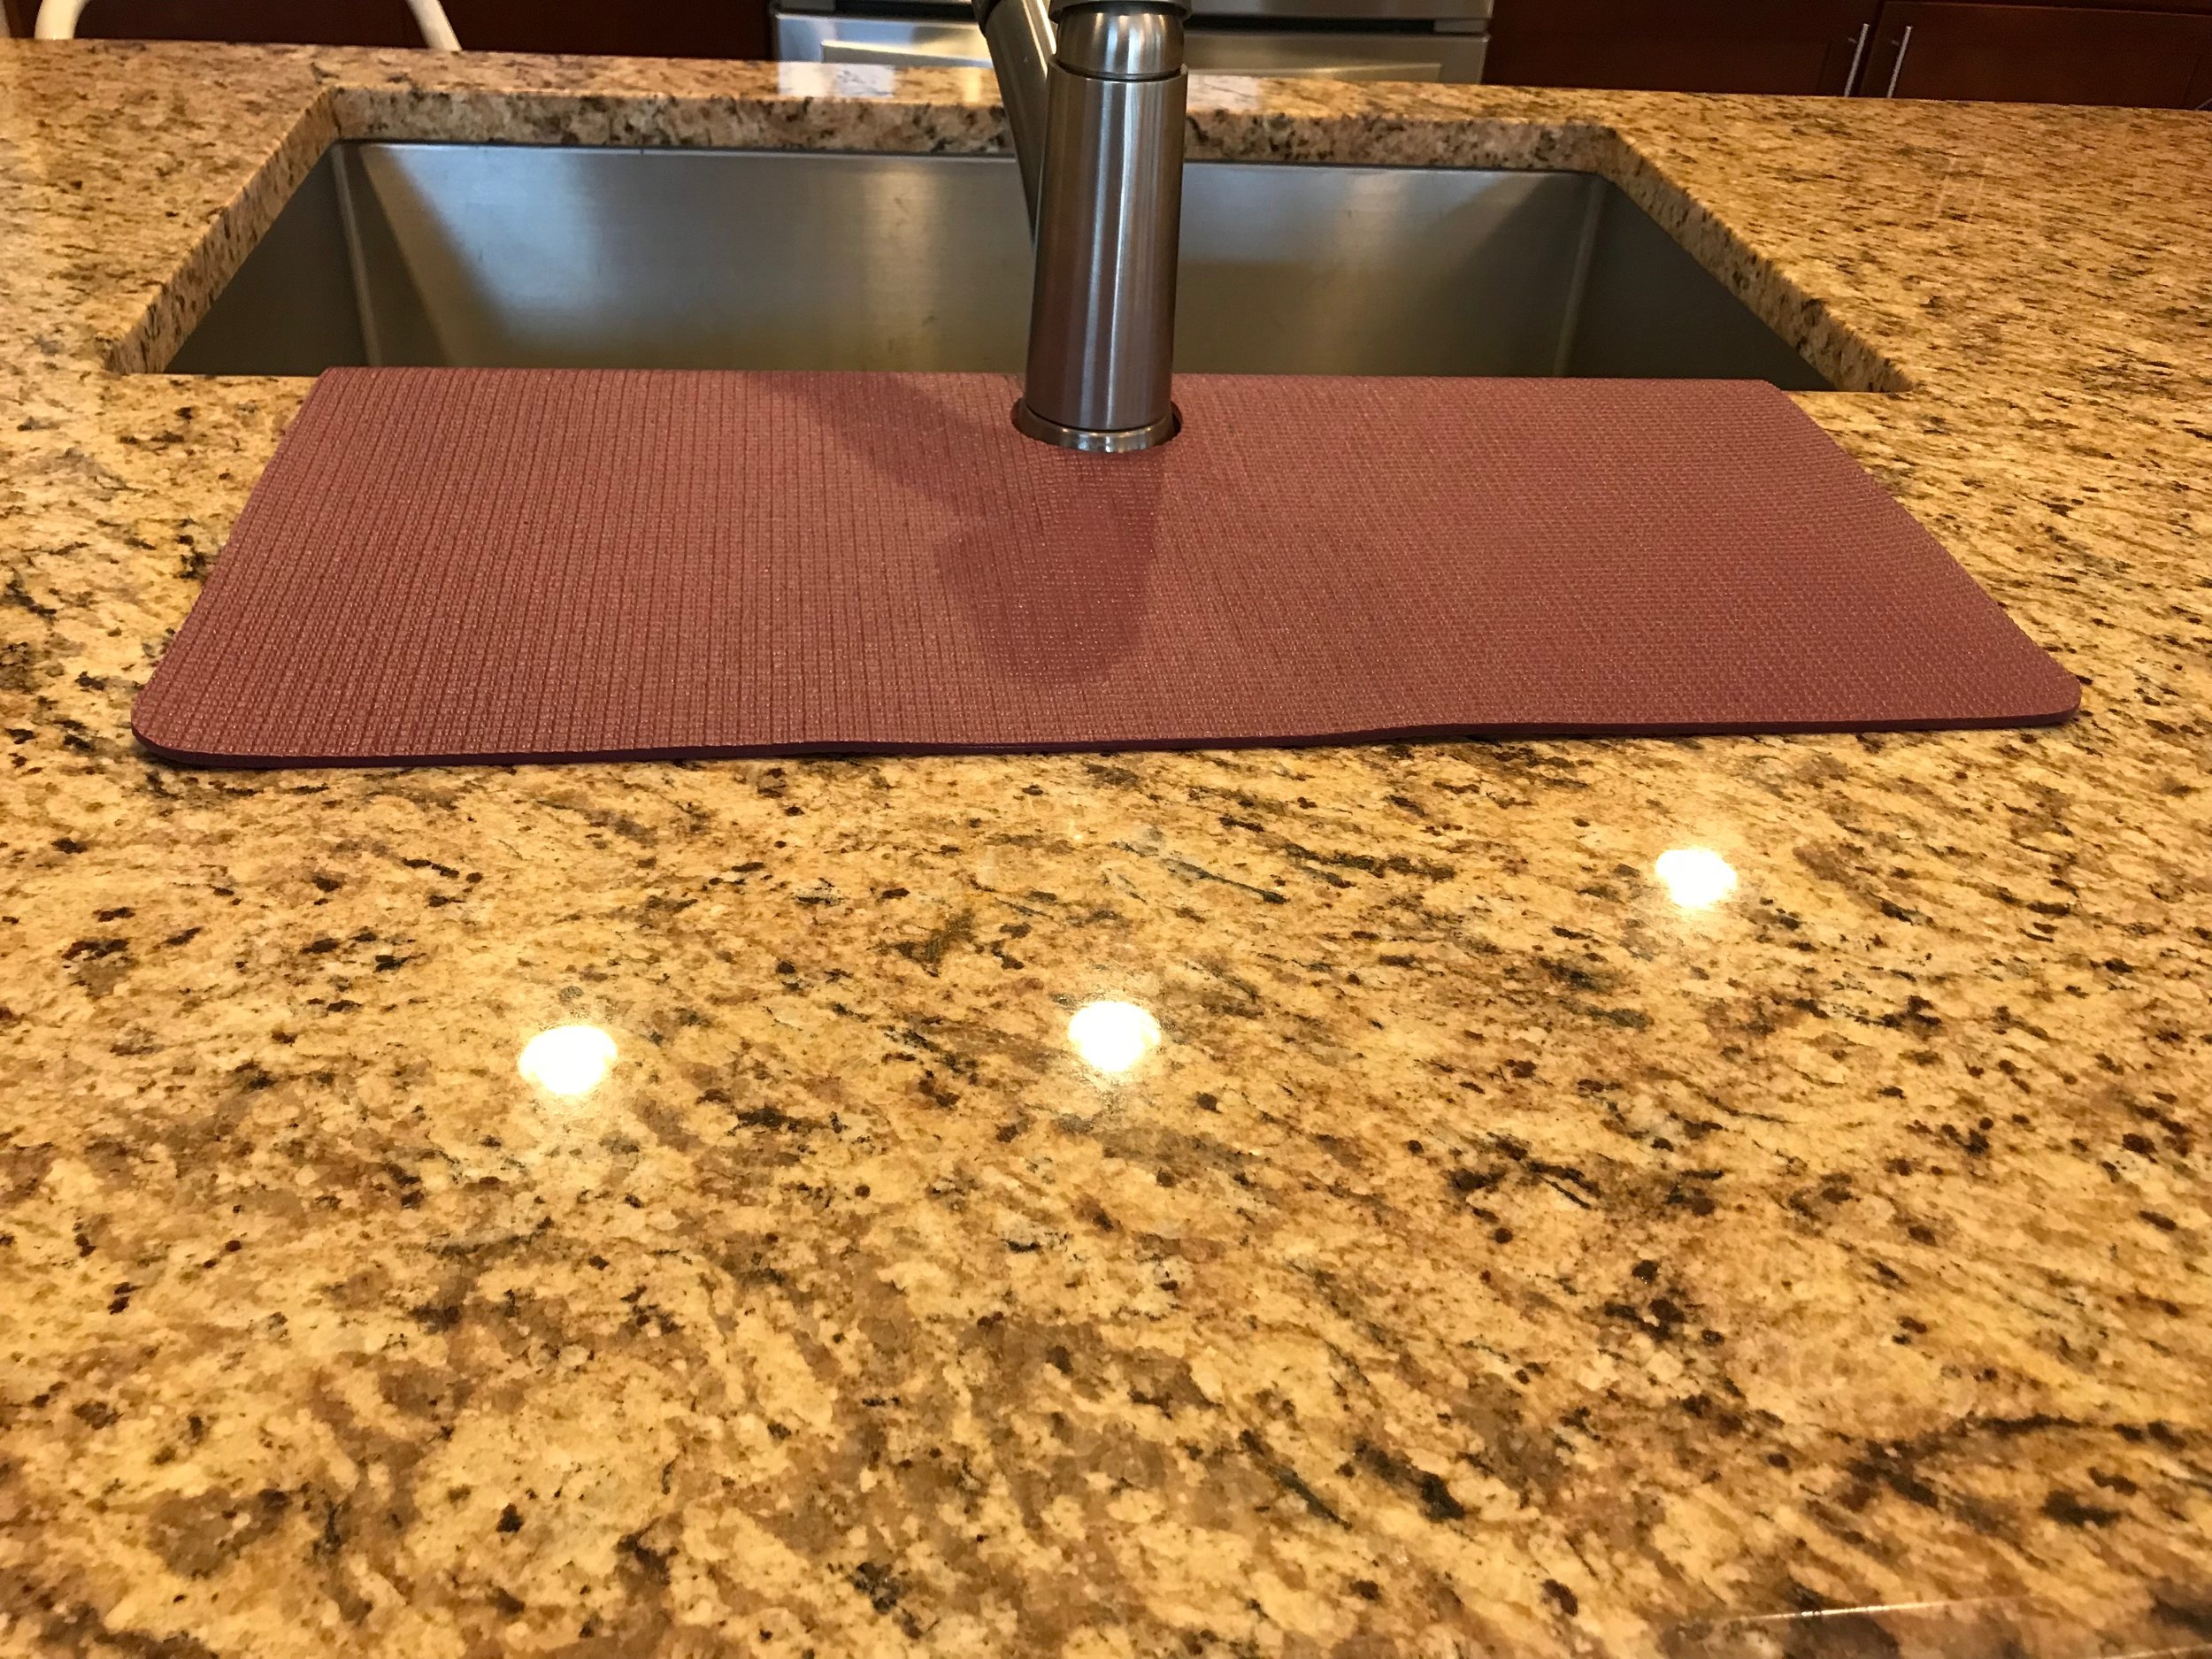 Maroon Kitchen Sink Faucet Splash Guard Protects From Water